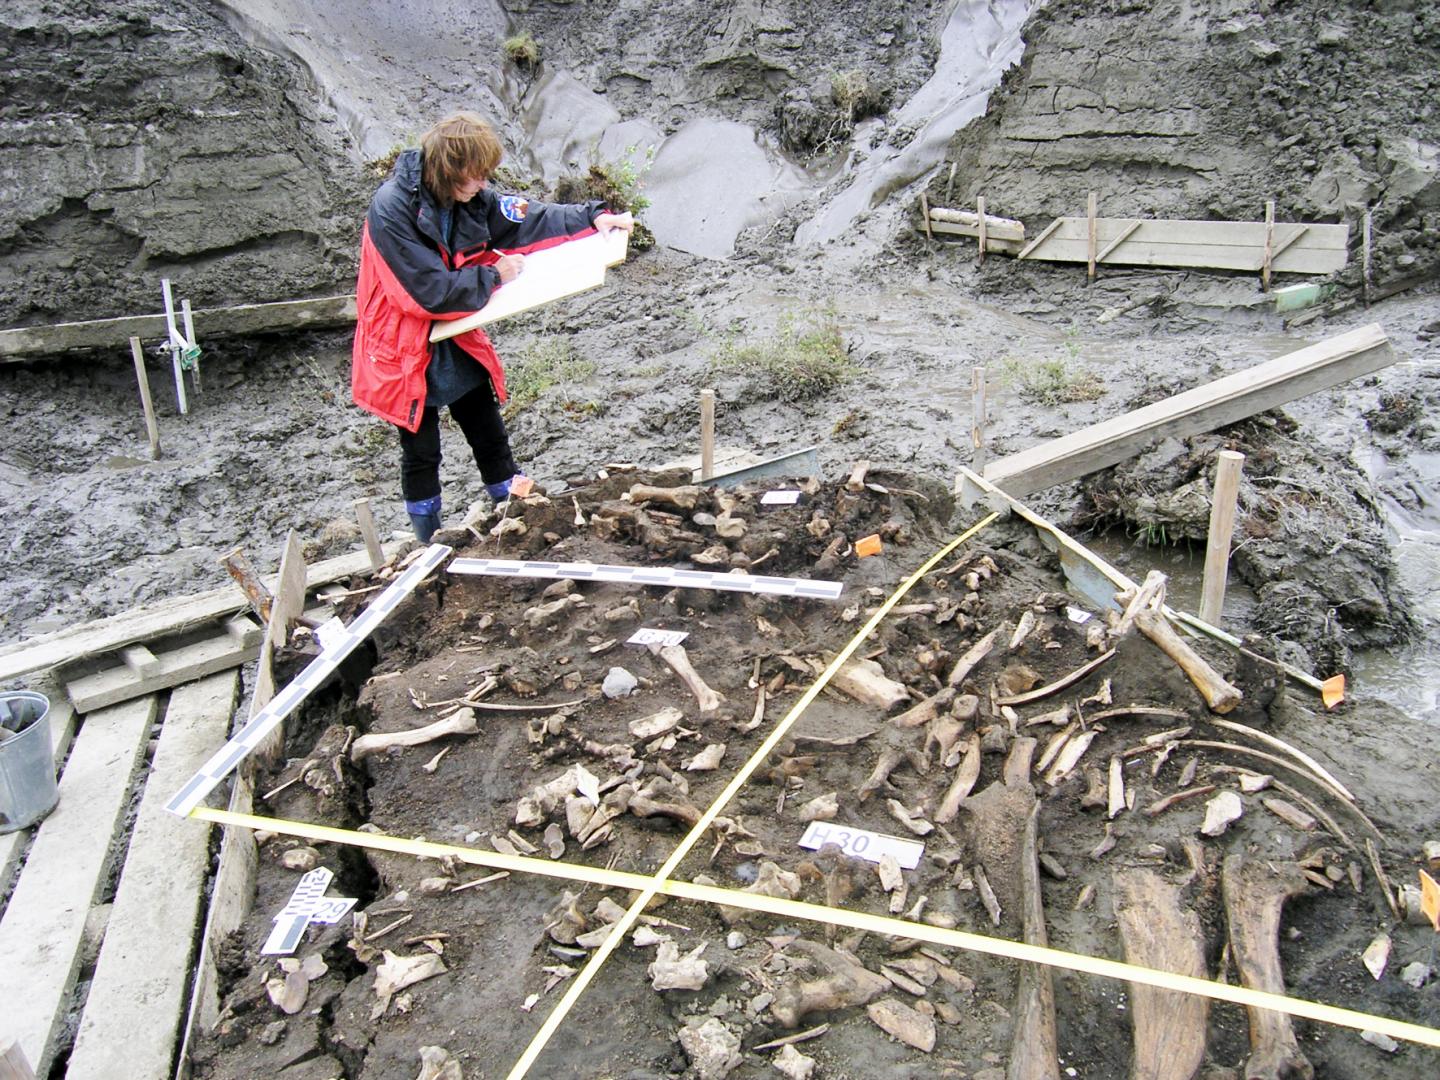 The Archaeological Site near the Yana River